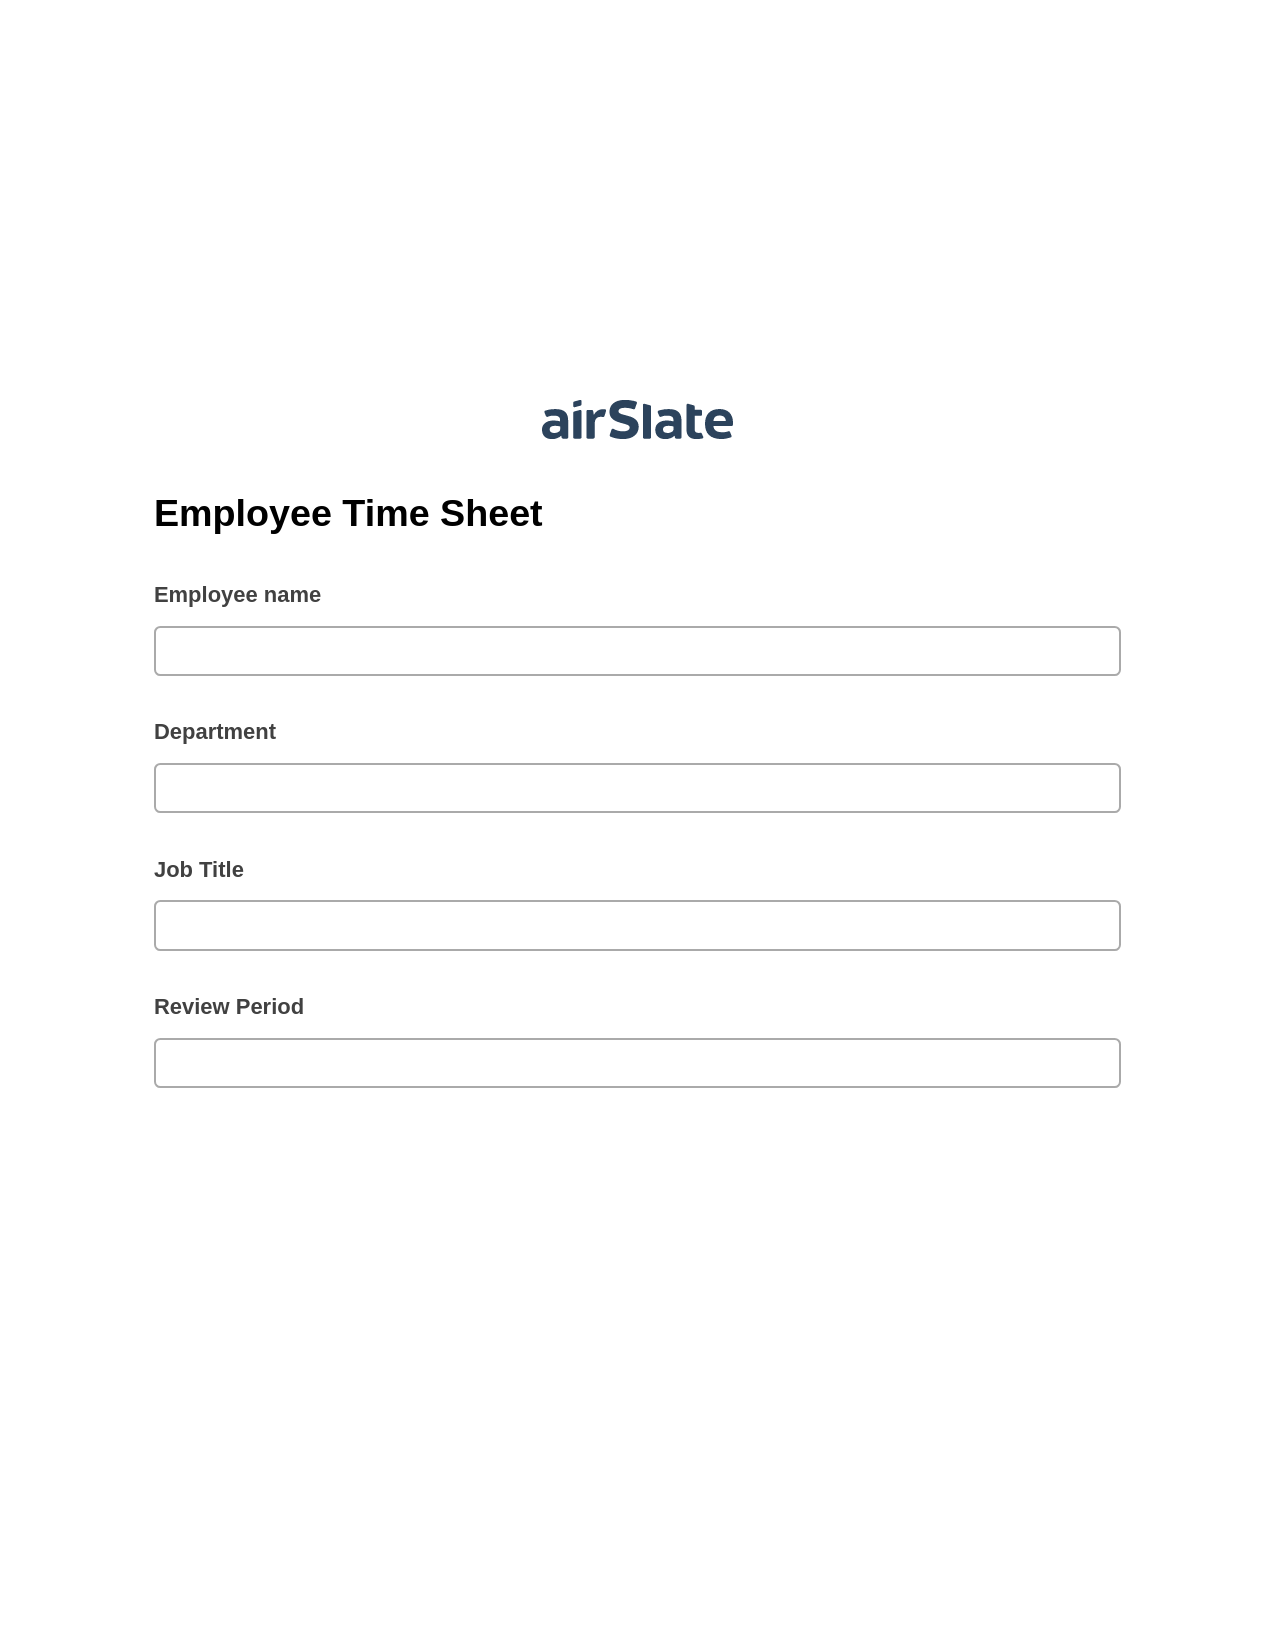 Employee Time Sheet Pre-fill Dropdowns from Excel Bot, Slack Notification Bot, Export to Excel 365 Bot